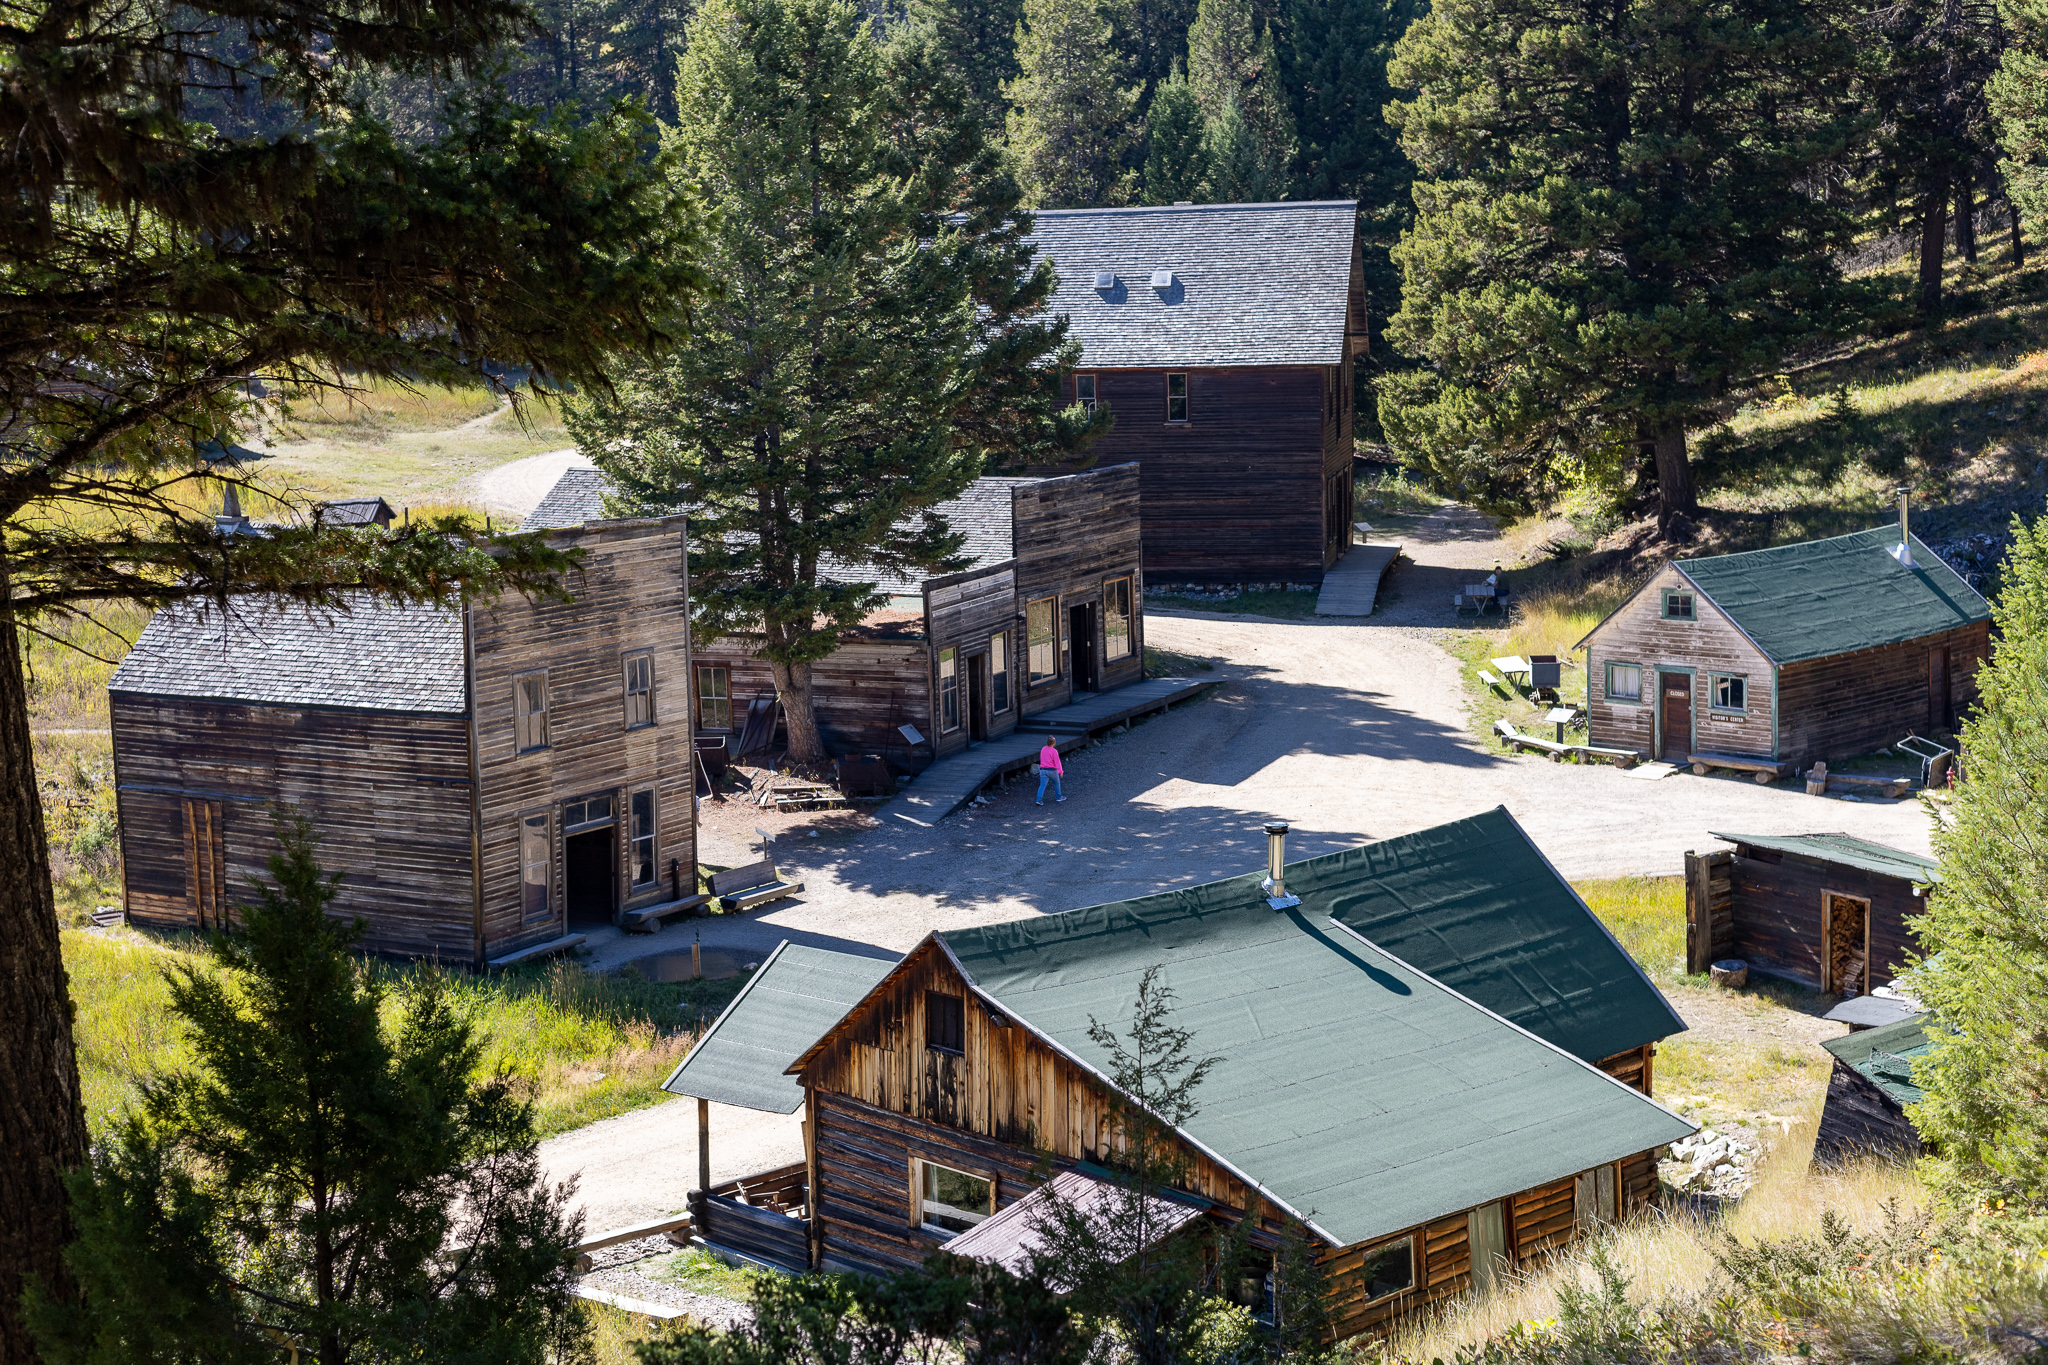 The nearby ghost town of Garnet at the Resort at Paws Up